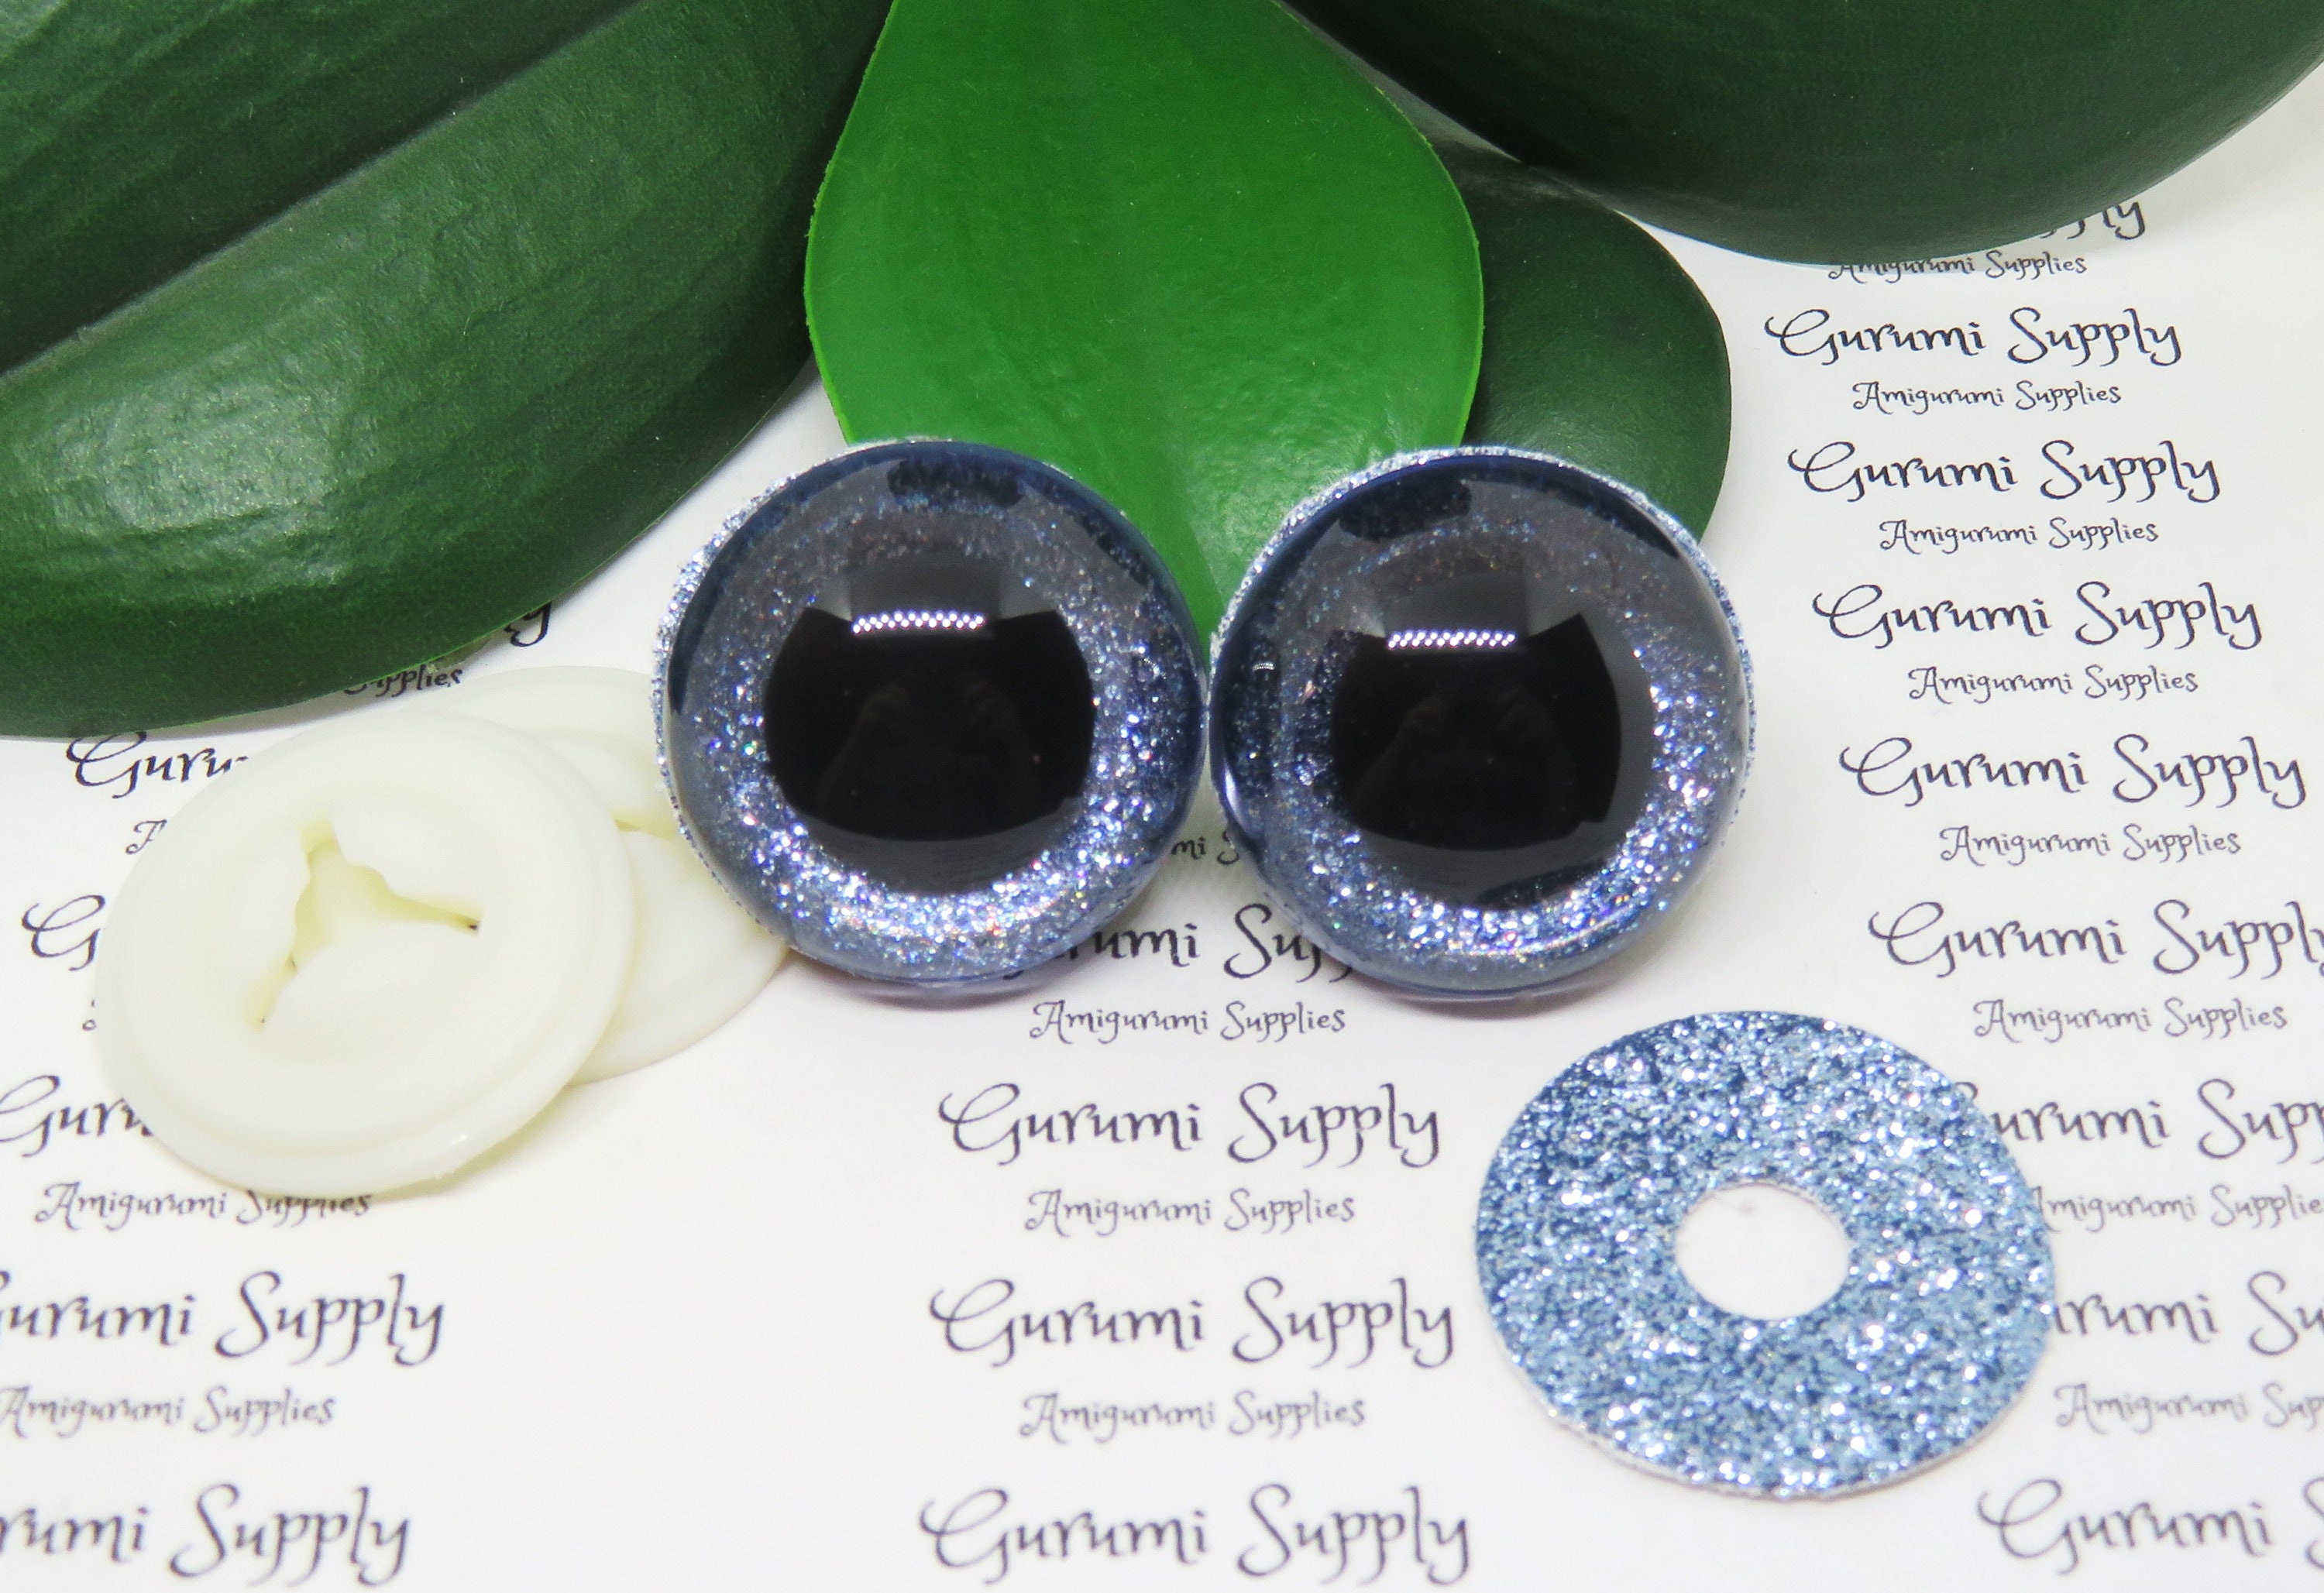 30mm Clear Round Safety Eyes with Blue Ice Glitter Non-Woven Slip Iris,  Black Pupil and Washers: 1 Pair - Doll / Amigurumi / Animal /Crochet